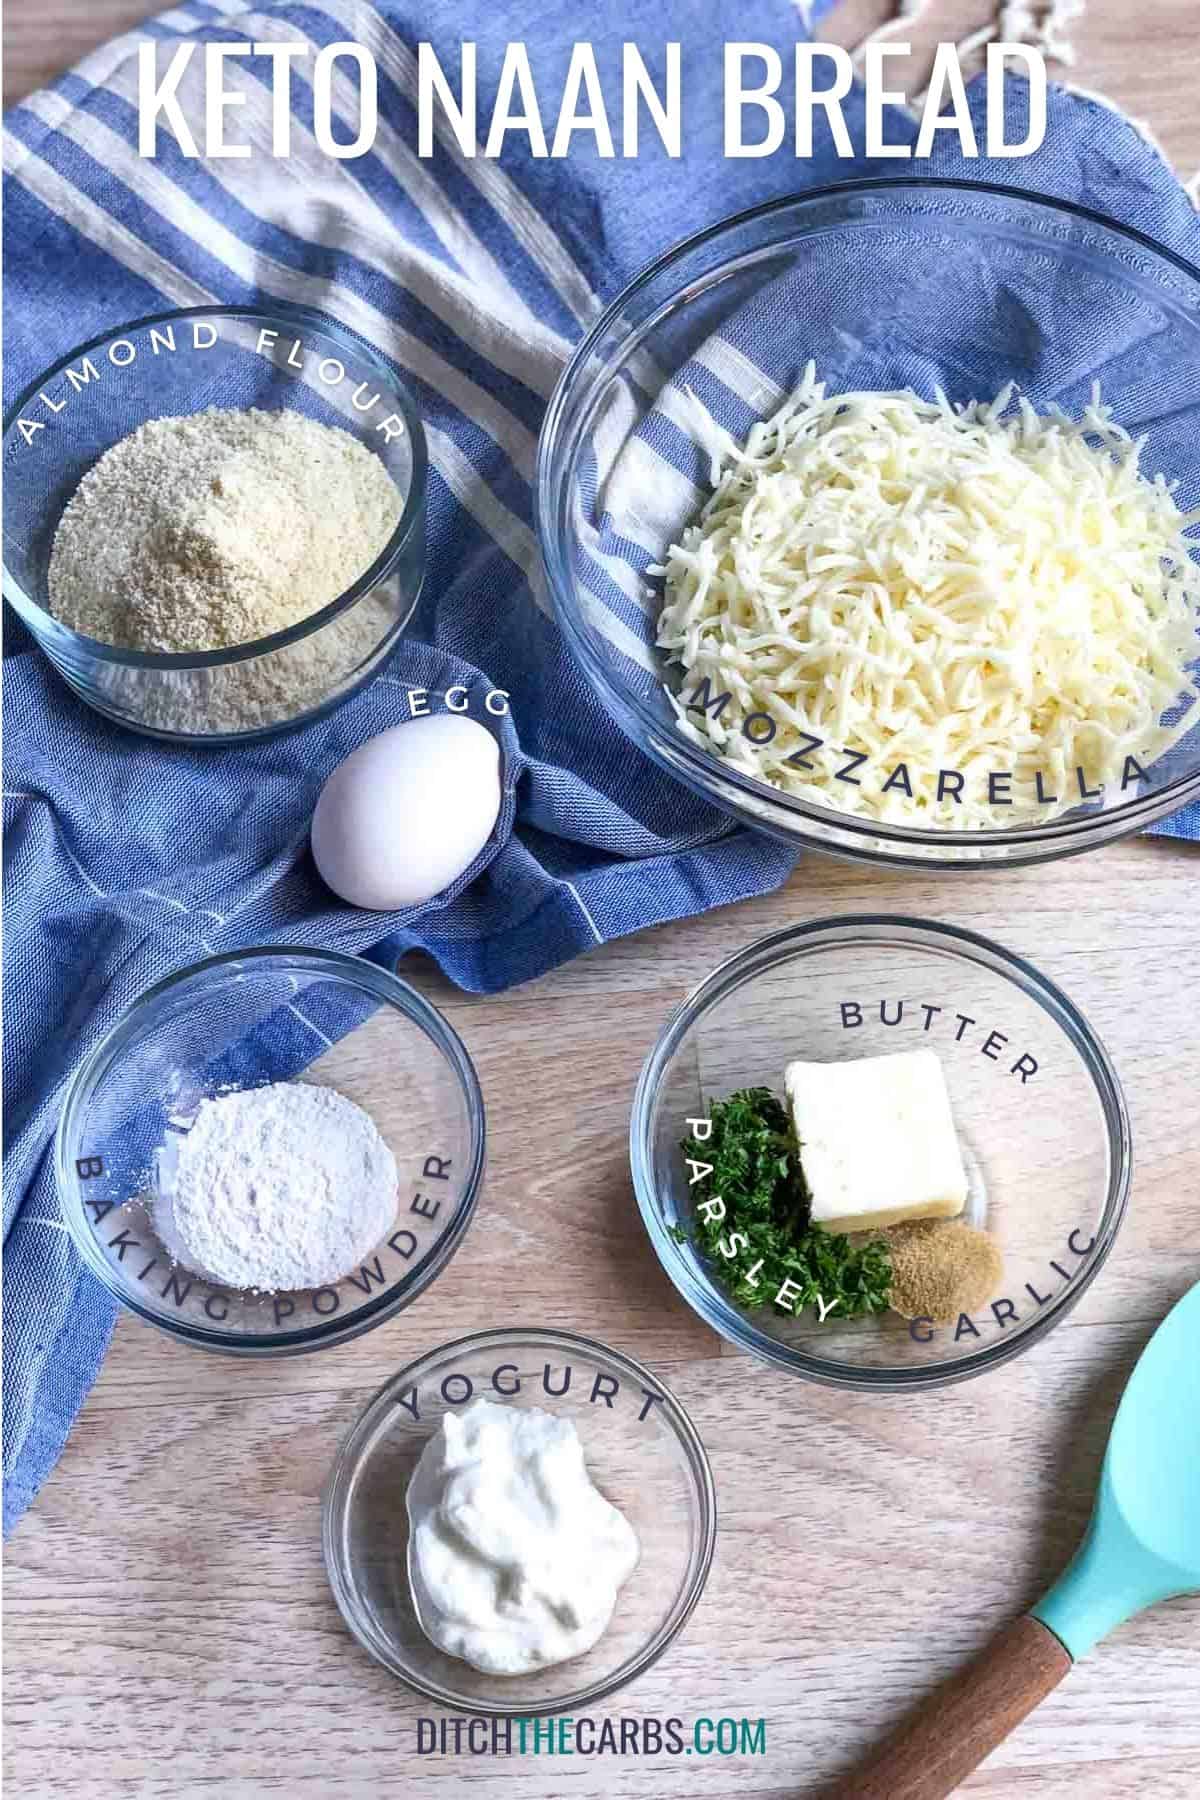 Ingredients needed for keto naan - almond flour, mozzarella cheese, egg, butter, parsley, garlic, yougurt, and baking powder.